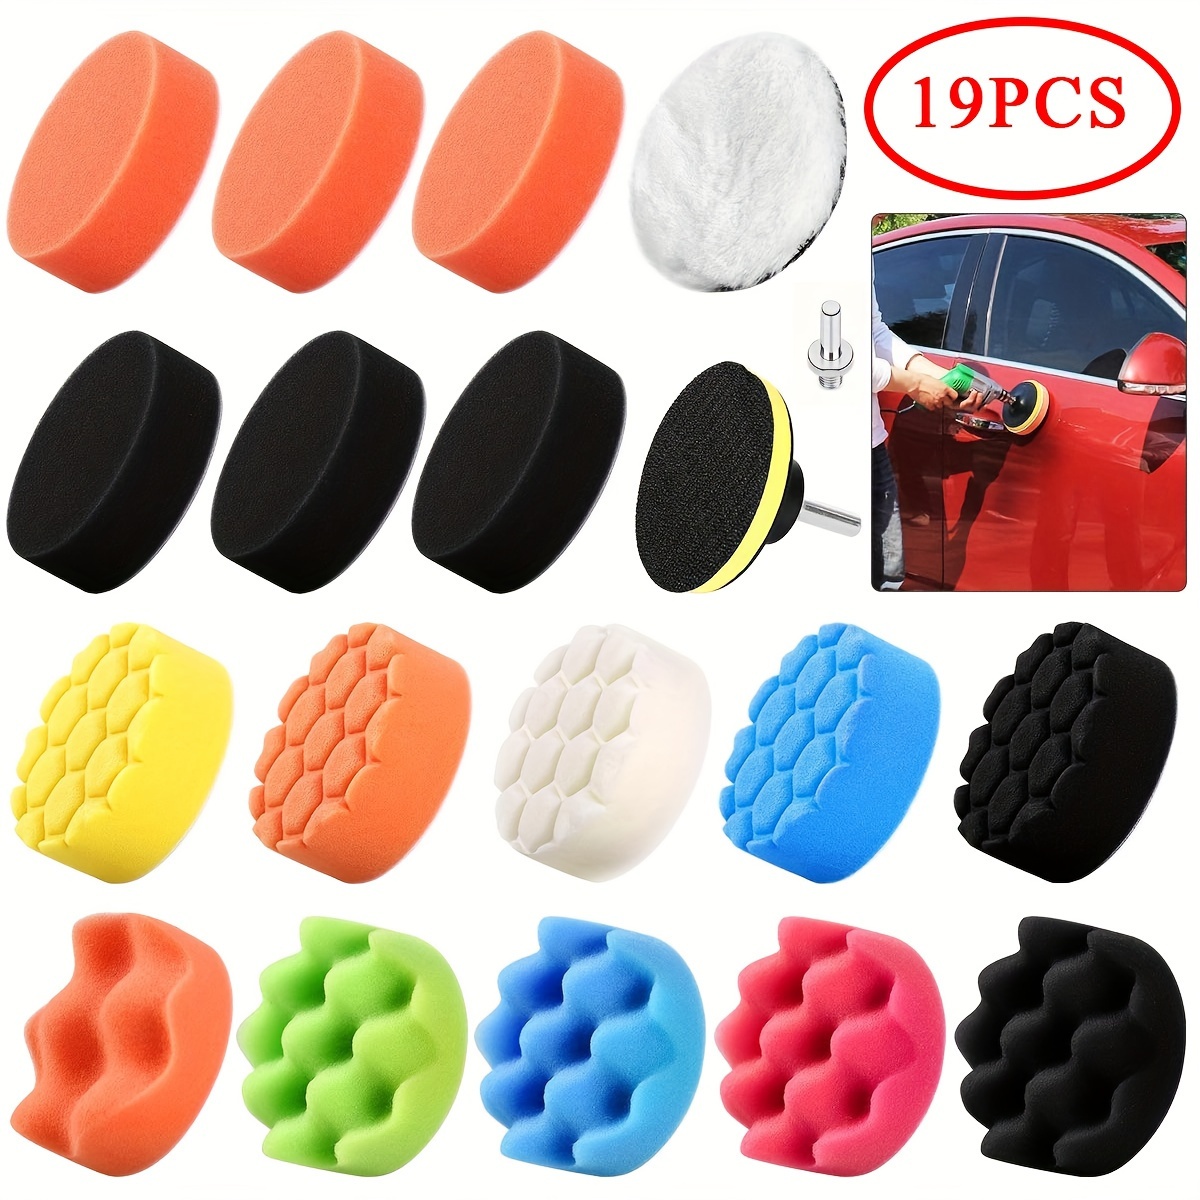 

19pcs Car Polishing And Detailing Set, Buffing Pads With Sponge, Wool Pad, And Sponge Wheel, Auto Waxing And Maintenance Kit With Plastic Materials